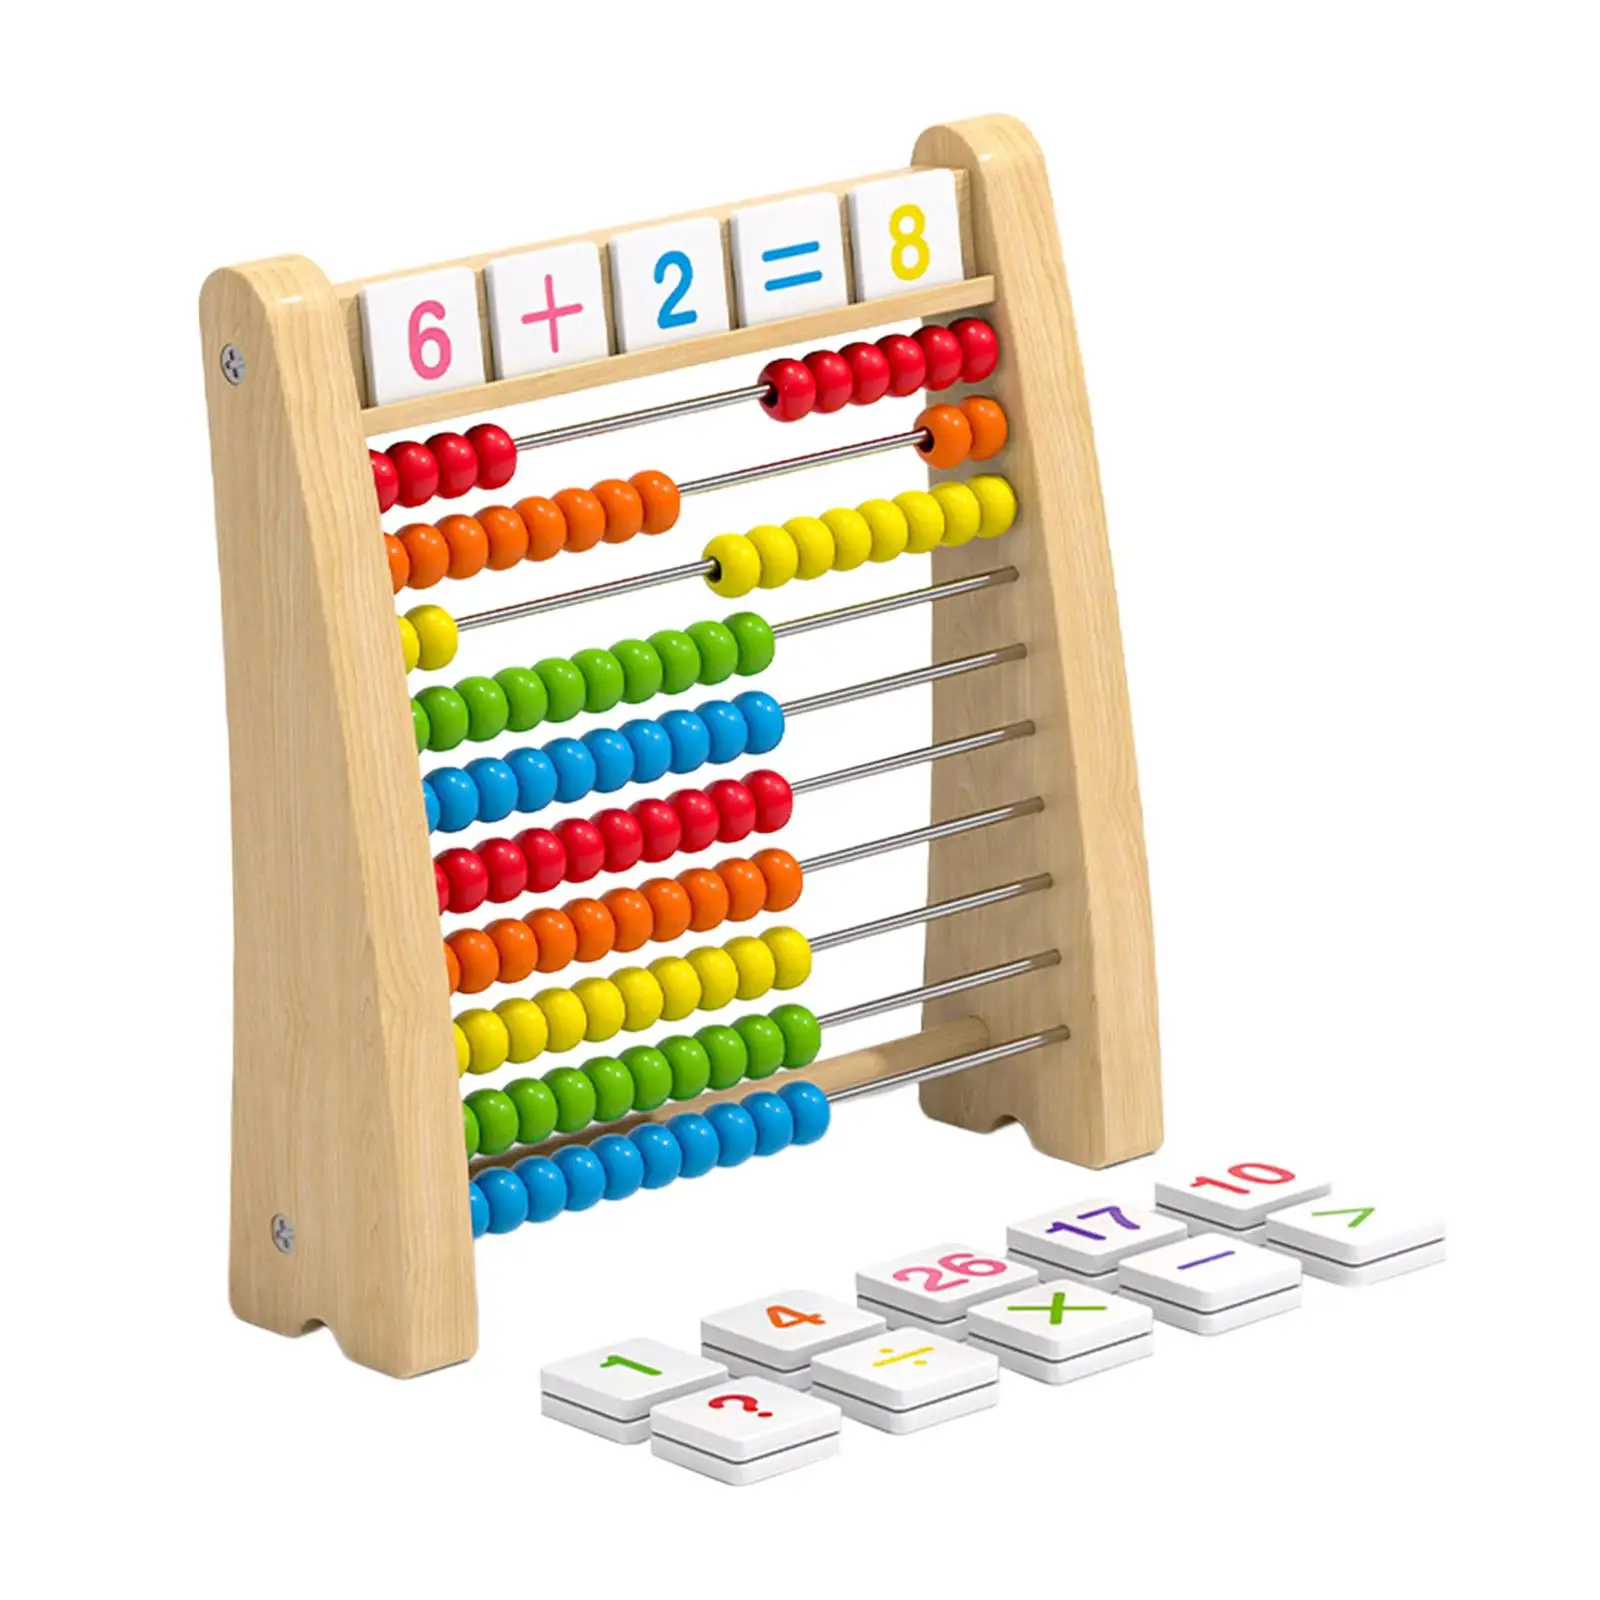 Classic Wooden Abacus Ten Frame Set Math Counters for Kids with Number Cards Educational Counting Toy for Children Preschool